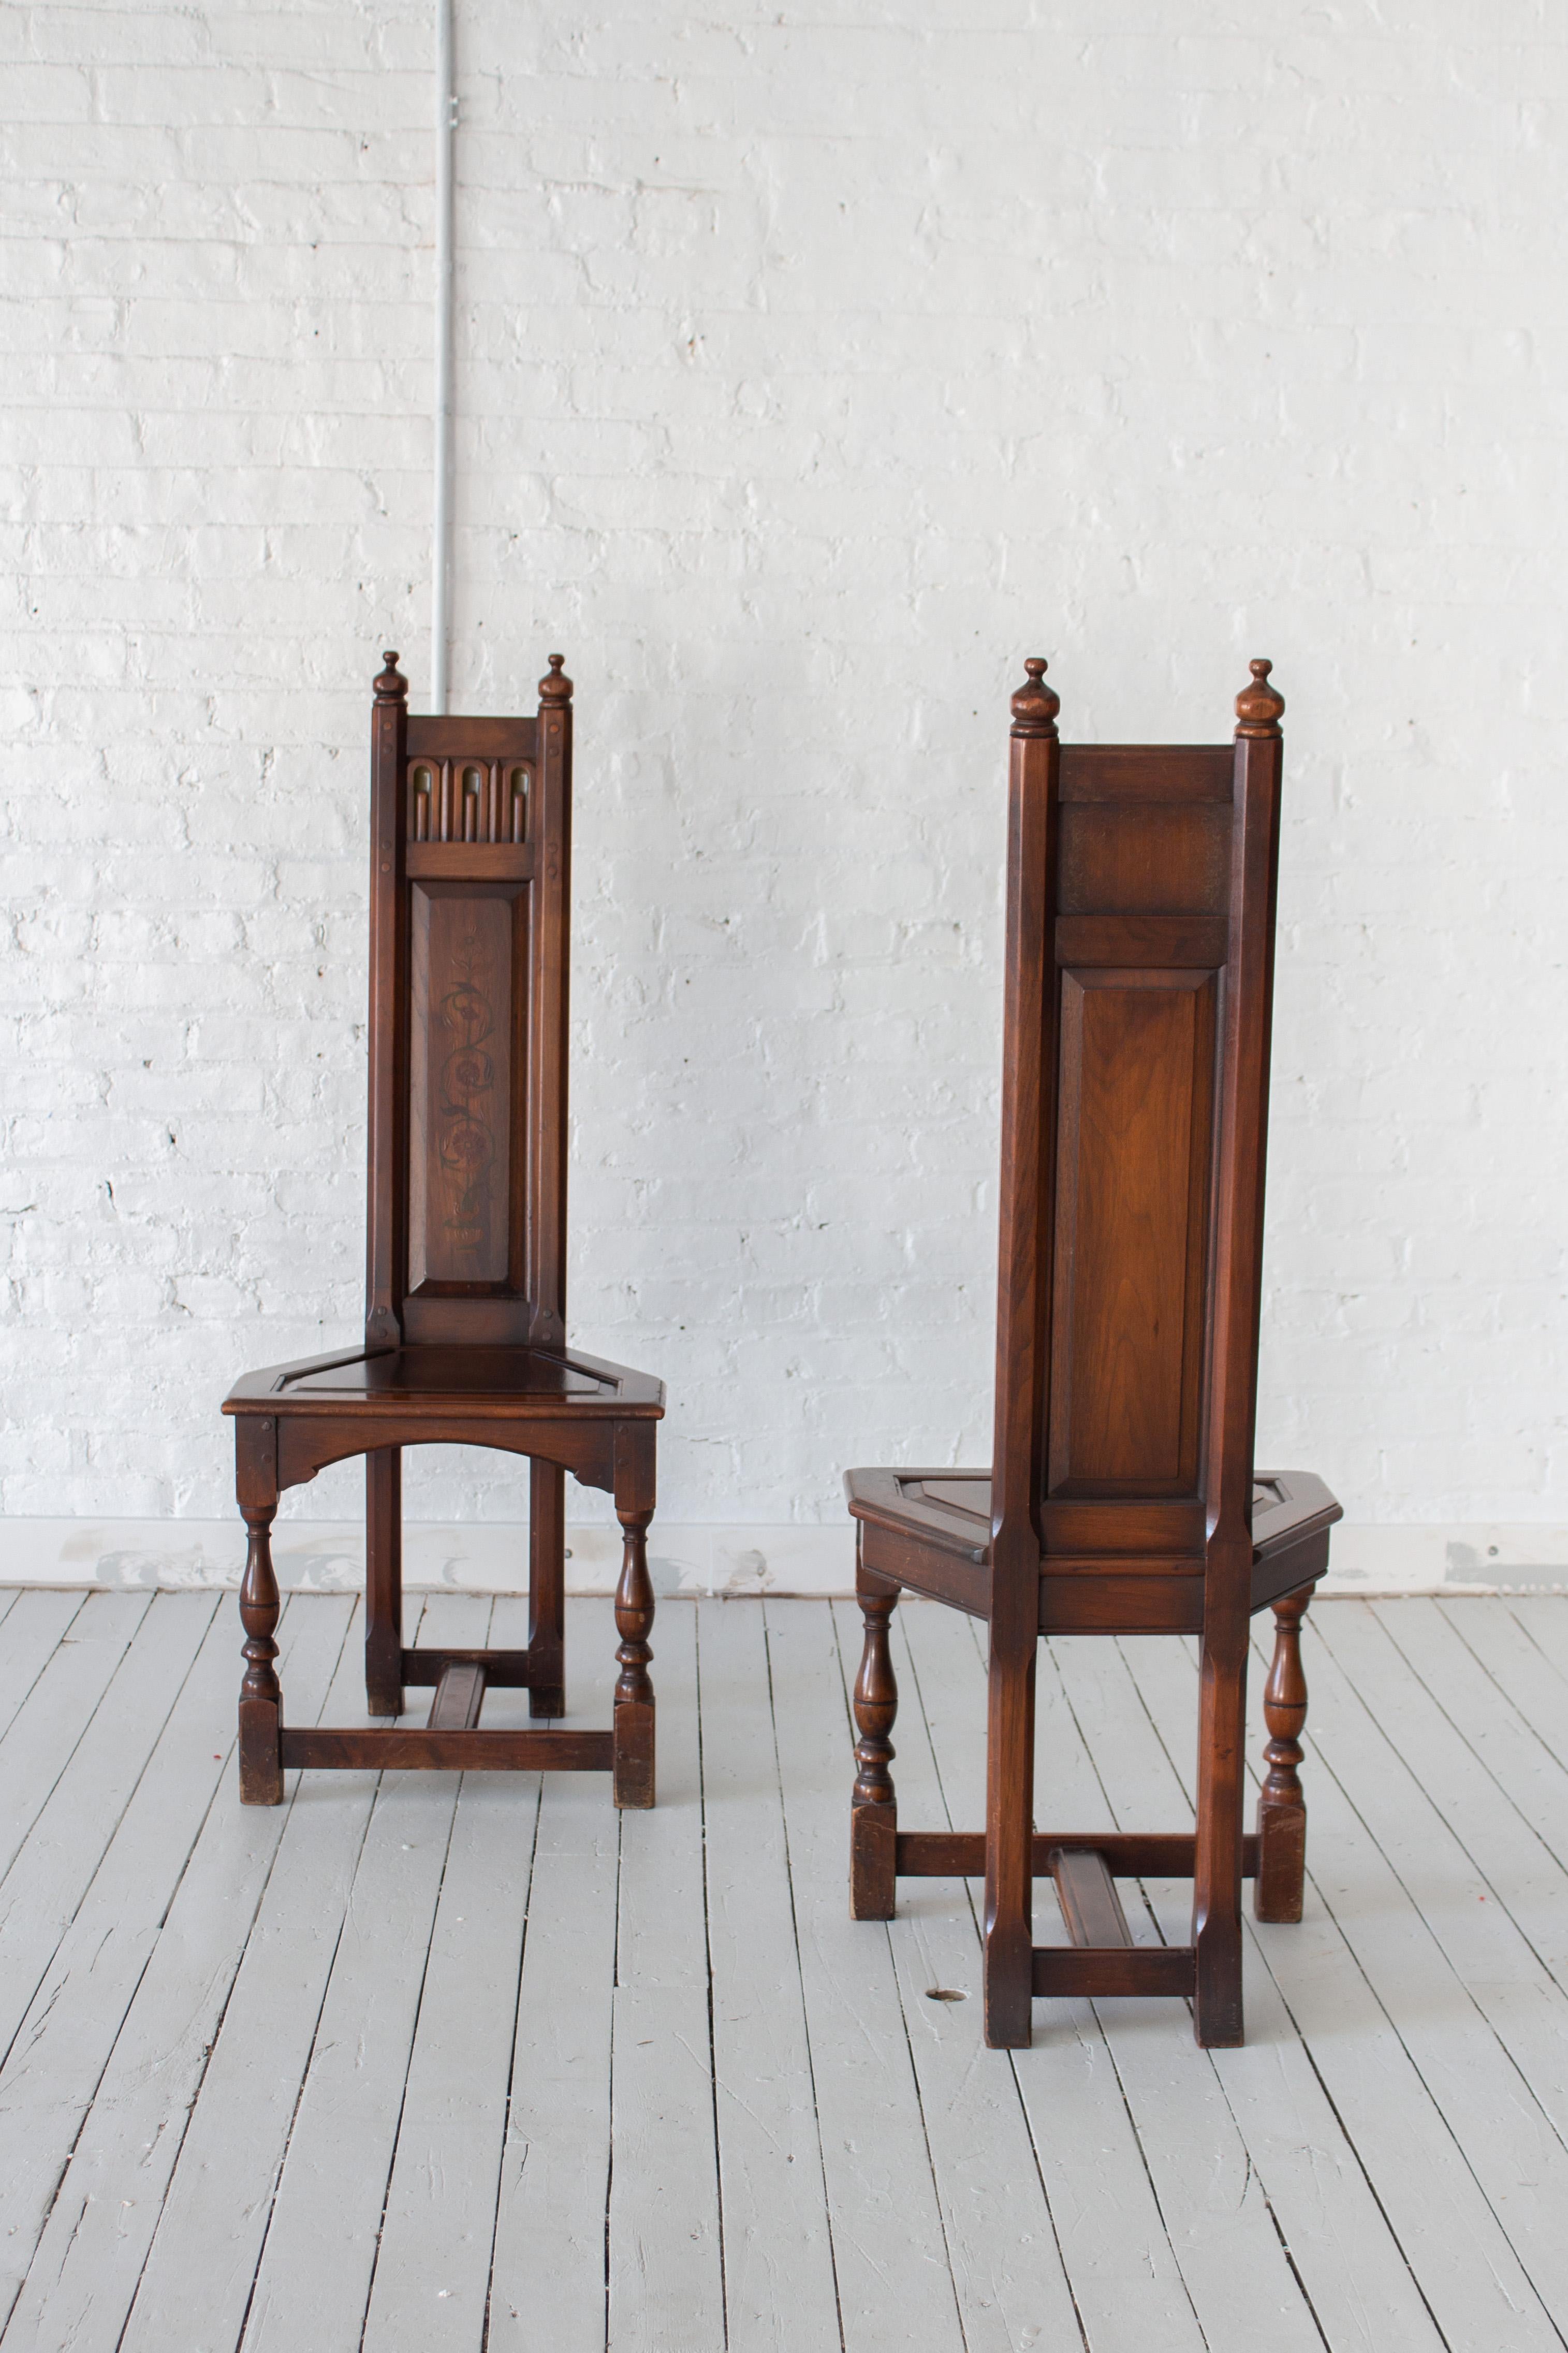 20th Century Pair of Gothic Revival Decorated Wooden Chairs by Kittinger For Sale